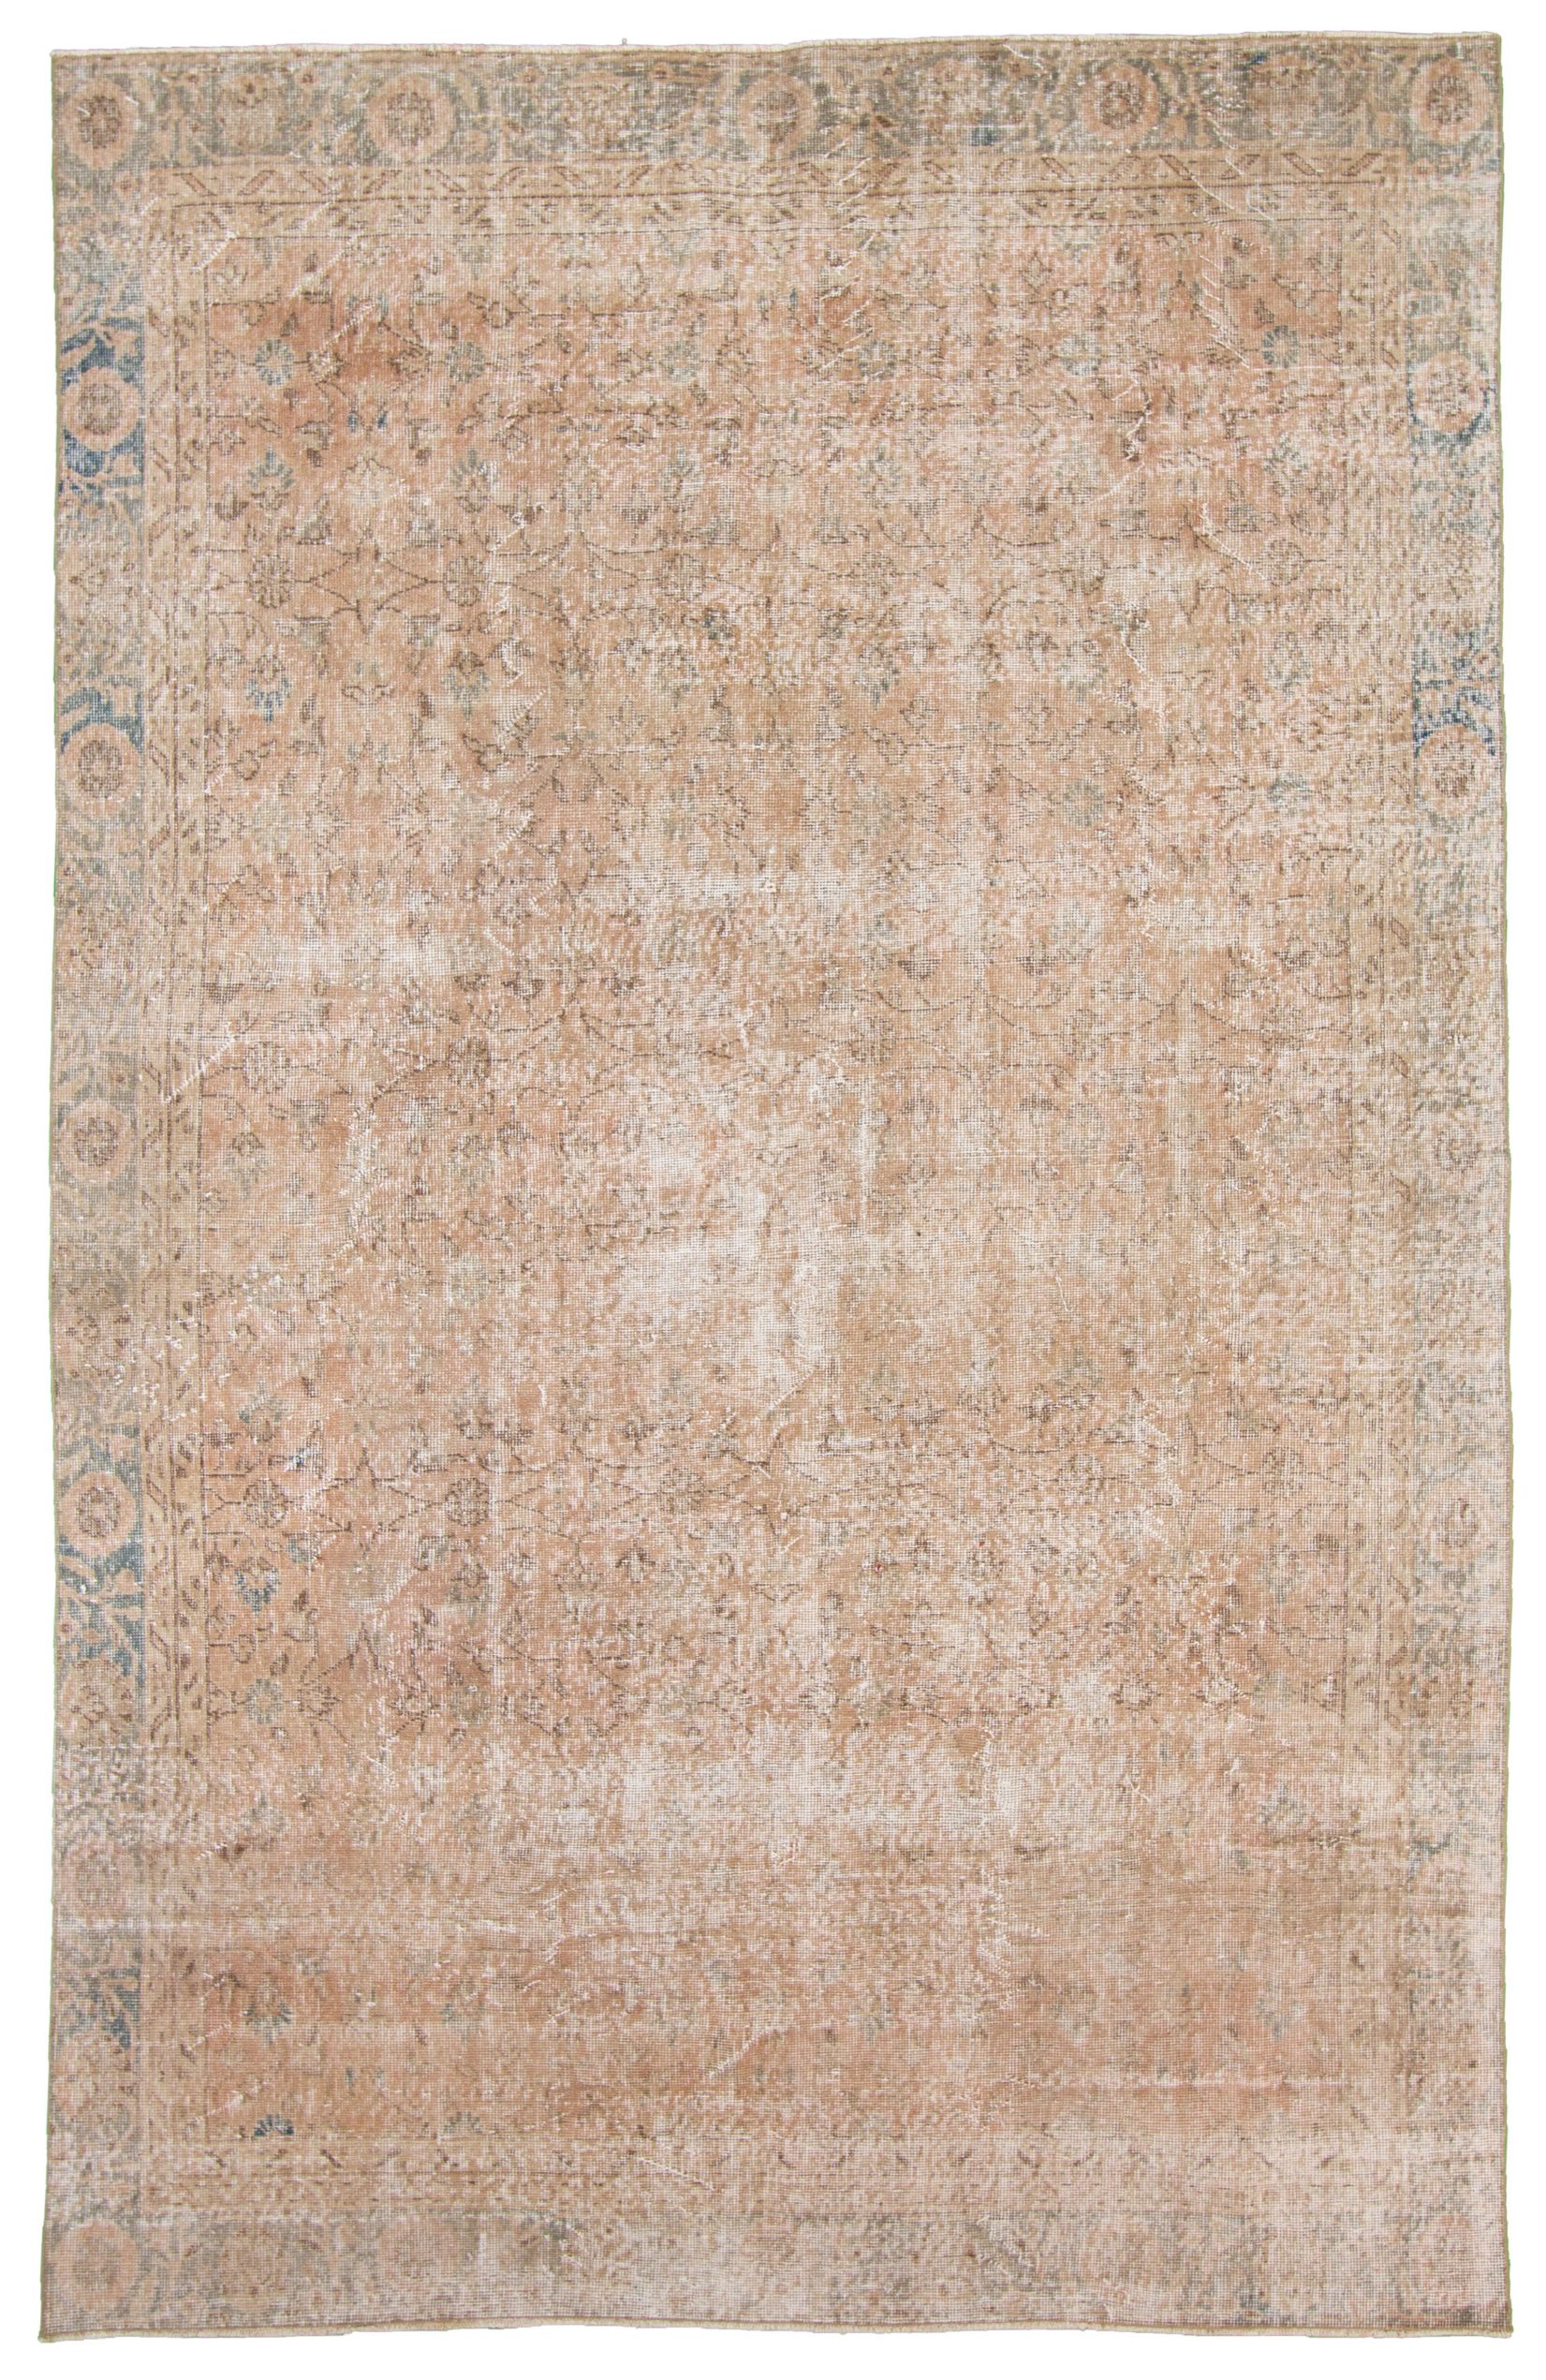 Hand-knotted Antalya Vintage   Rug 9'11" x 6'5" Size: 6'5" x 9'11"  